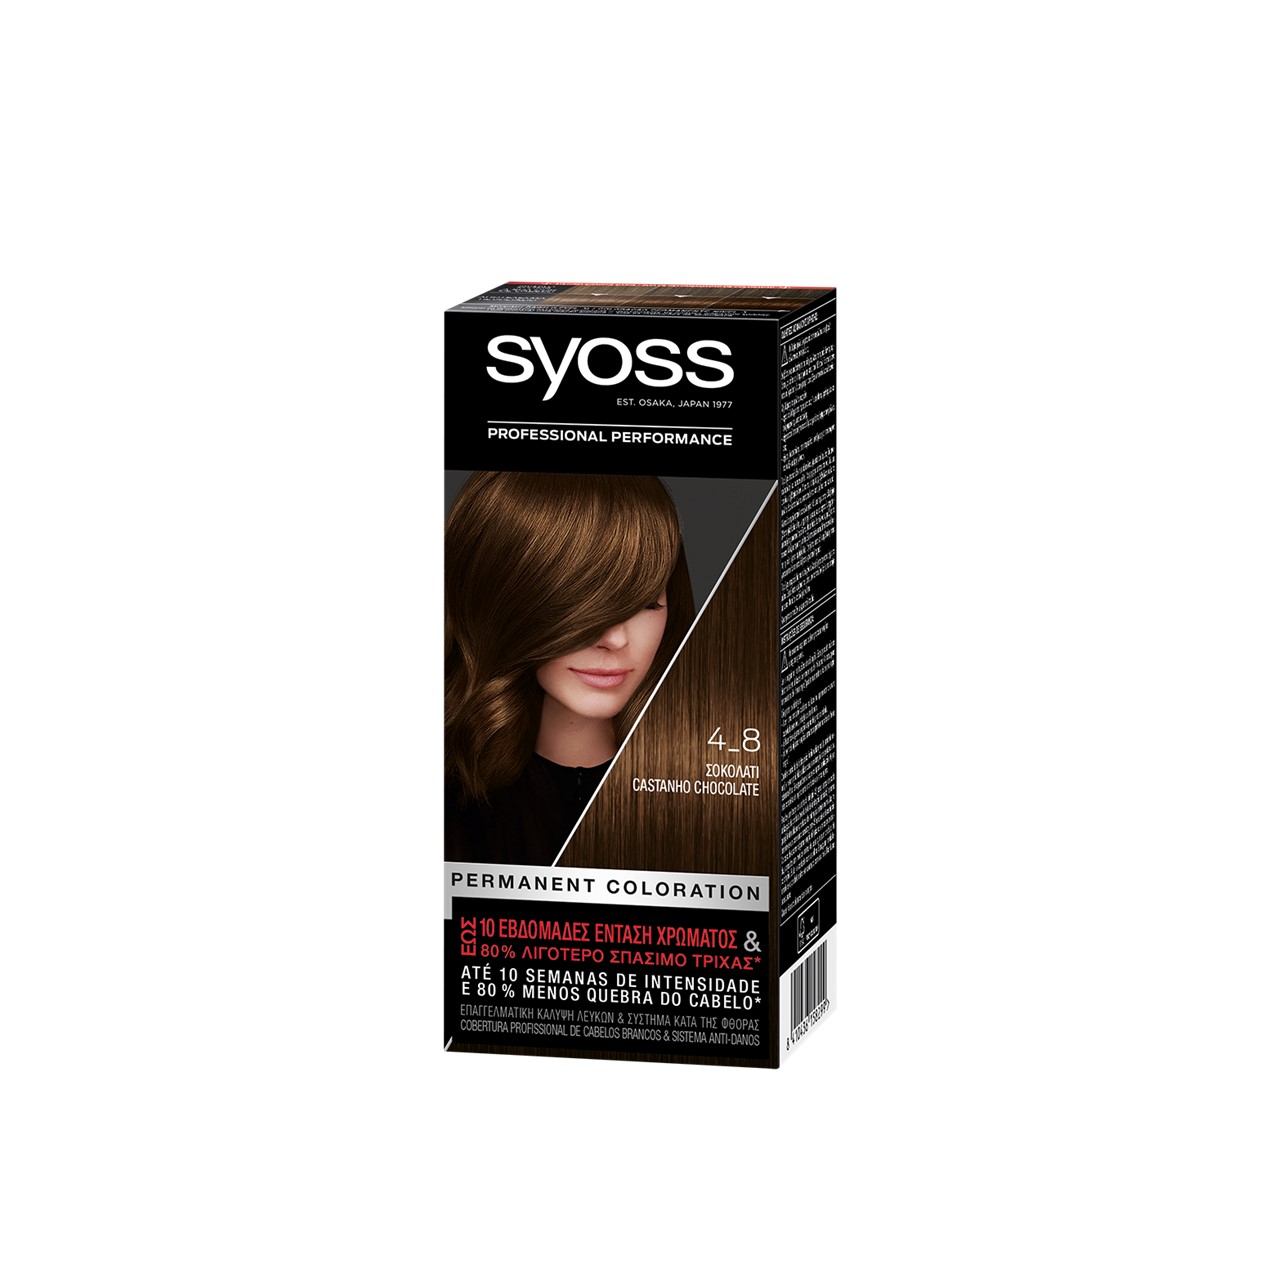 Syoss Permanent Coloration 4_8 Chocolate Brown Permanent Hair Dye